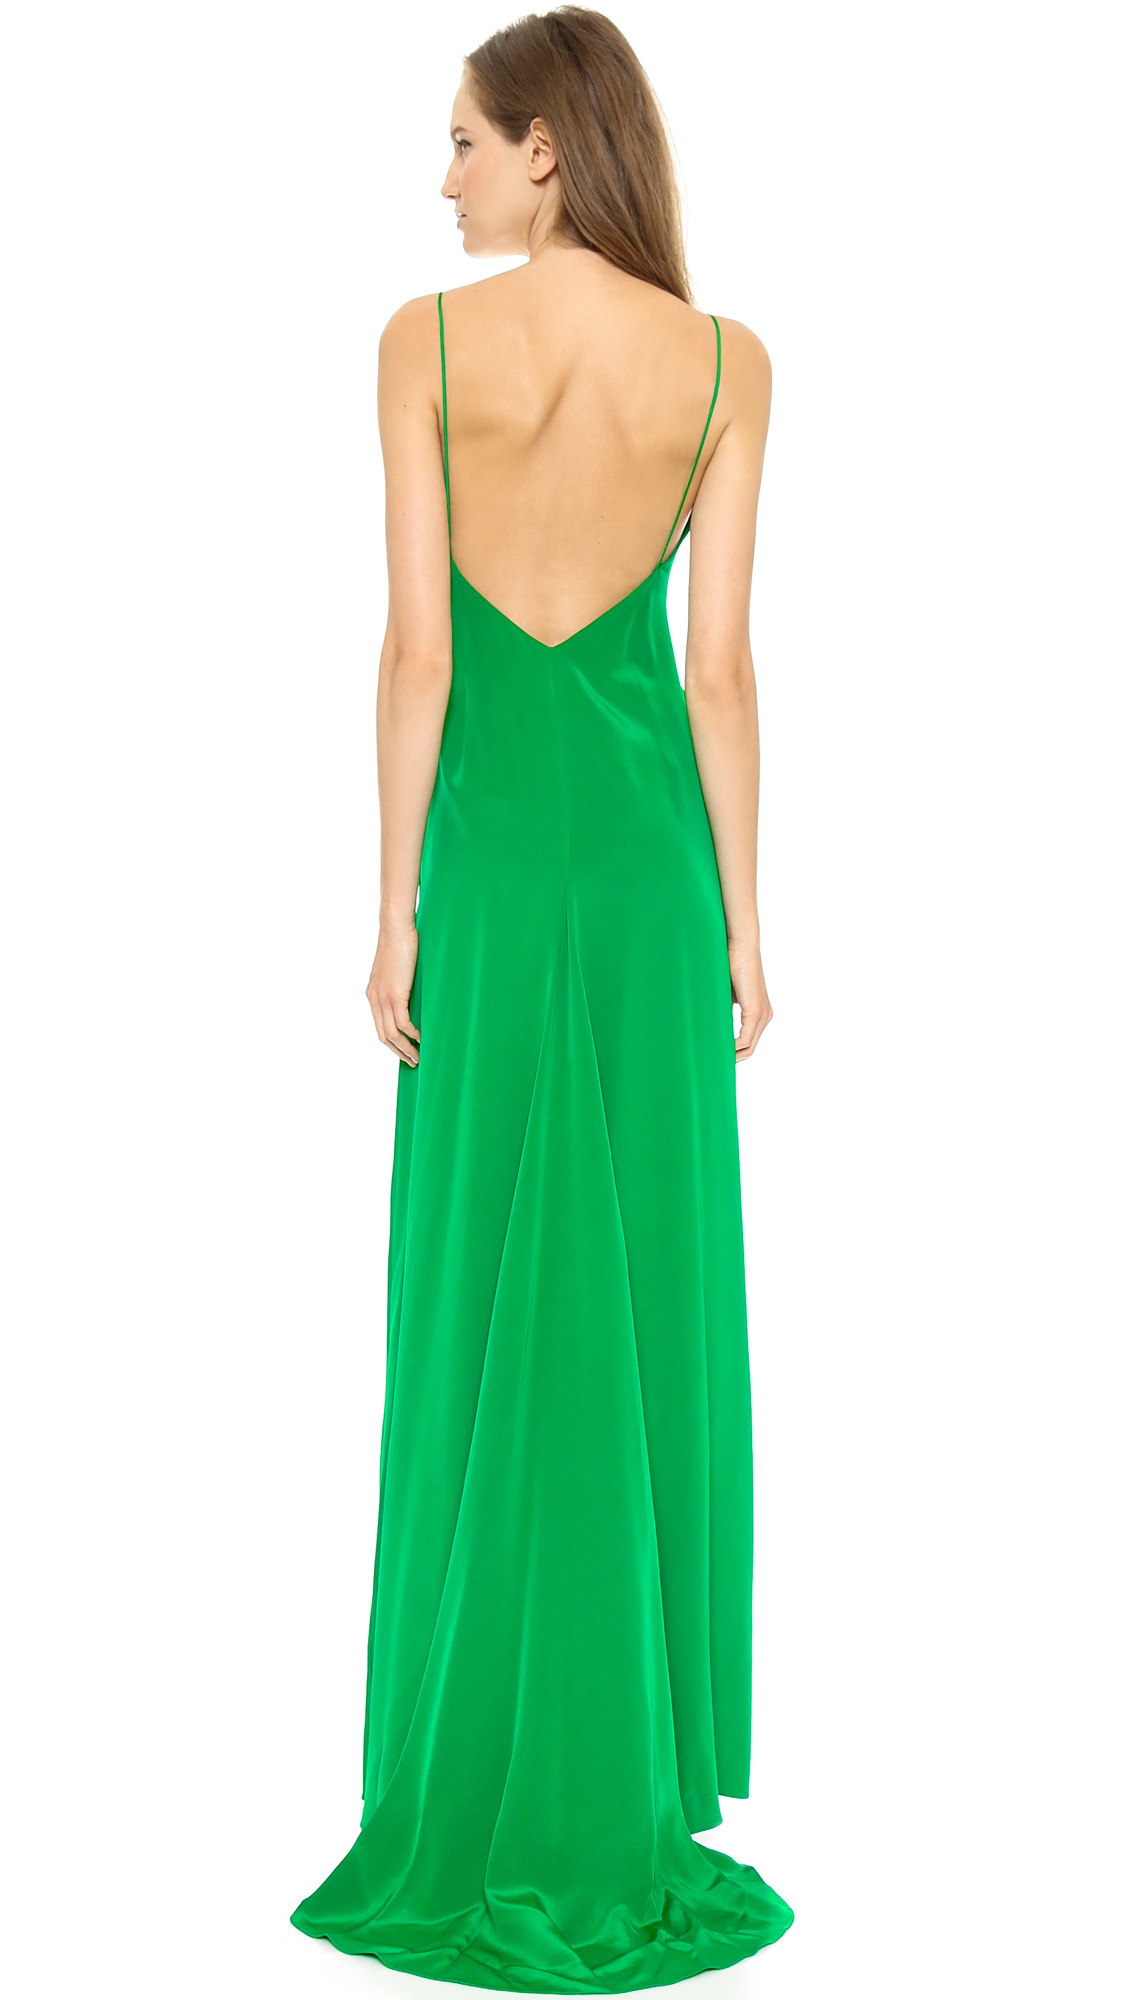 Lyst - Thakoon Lace Front Camisole Gown - Kelly Green in Green